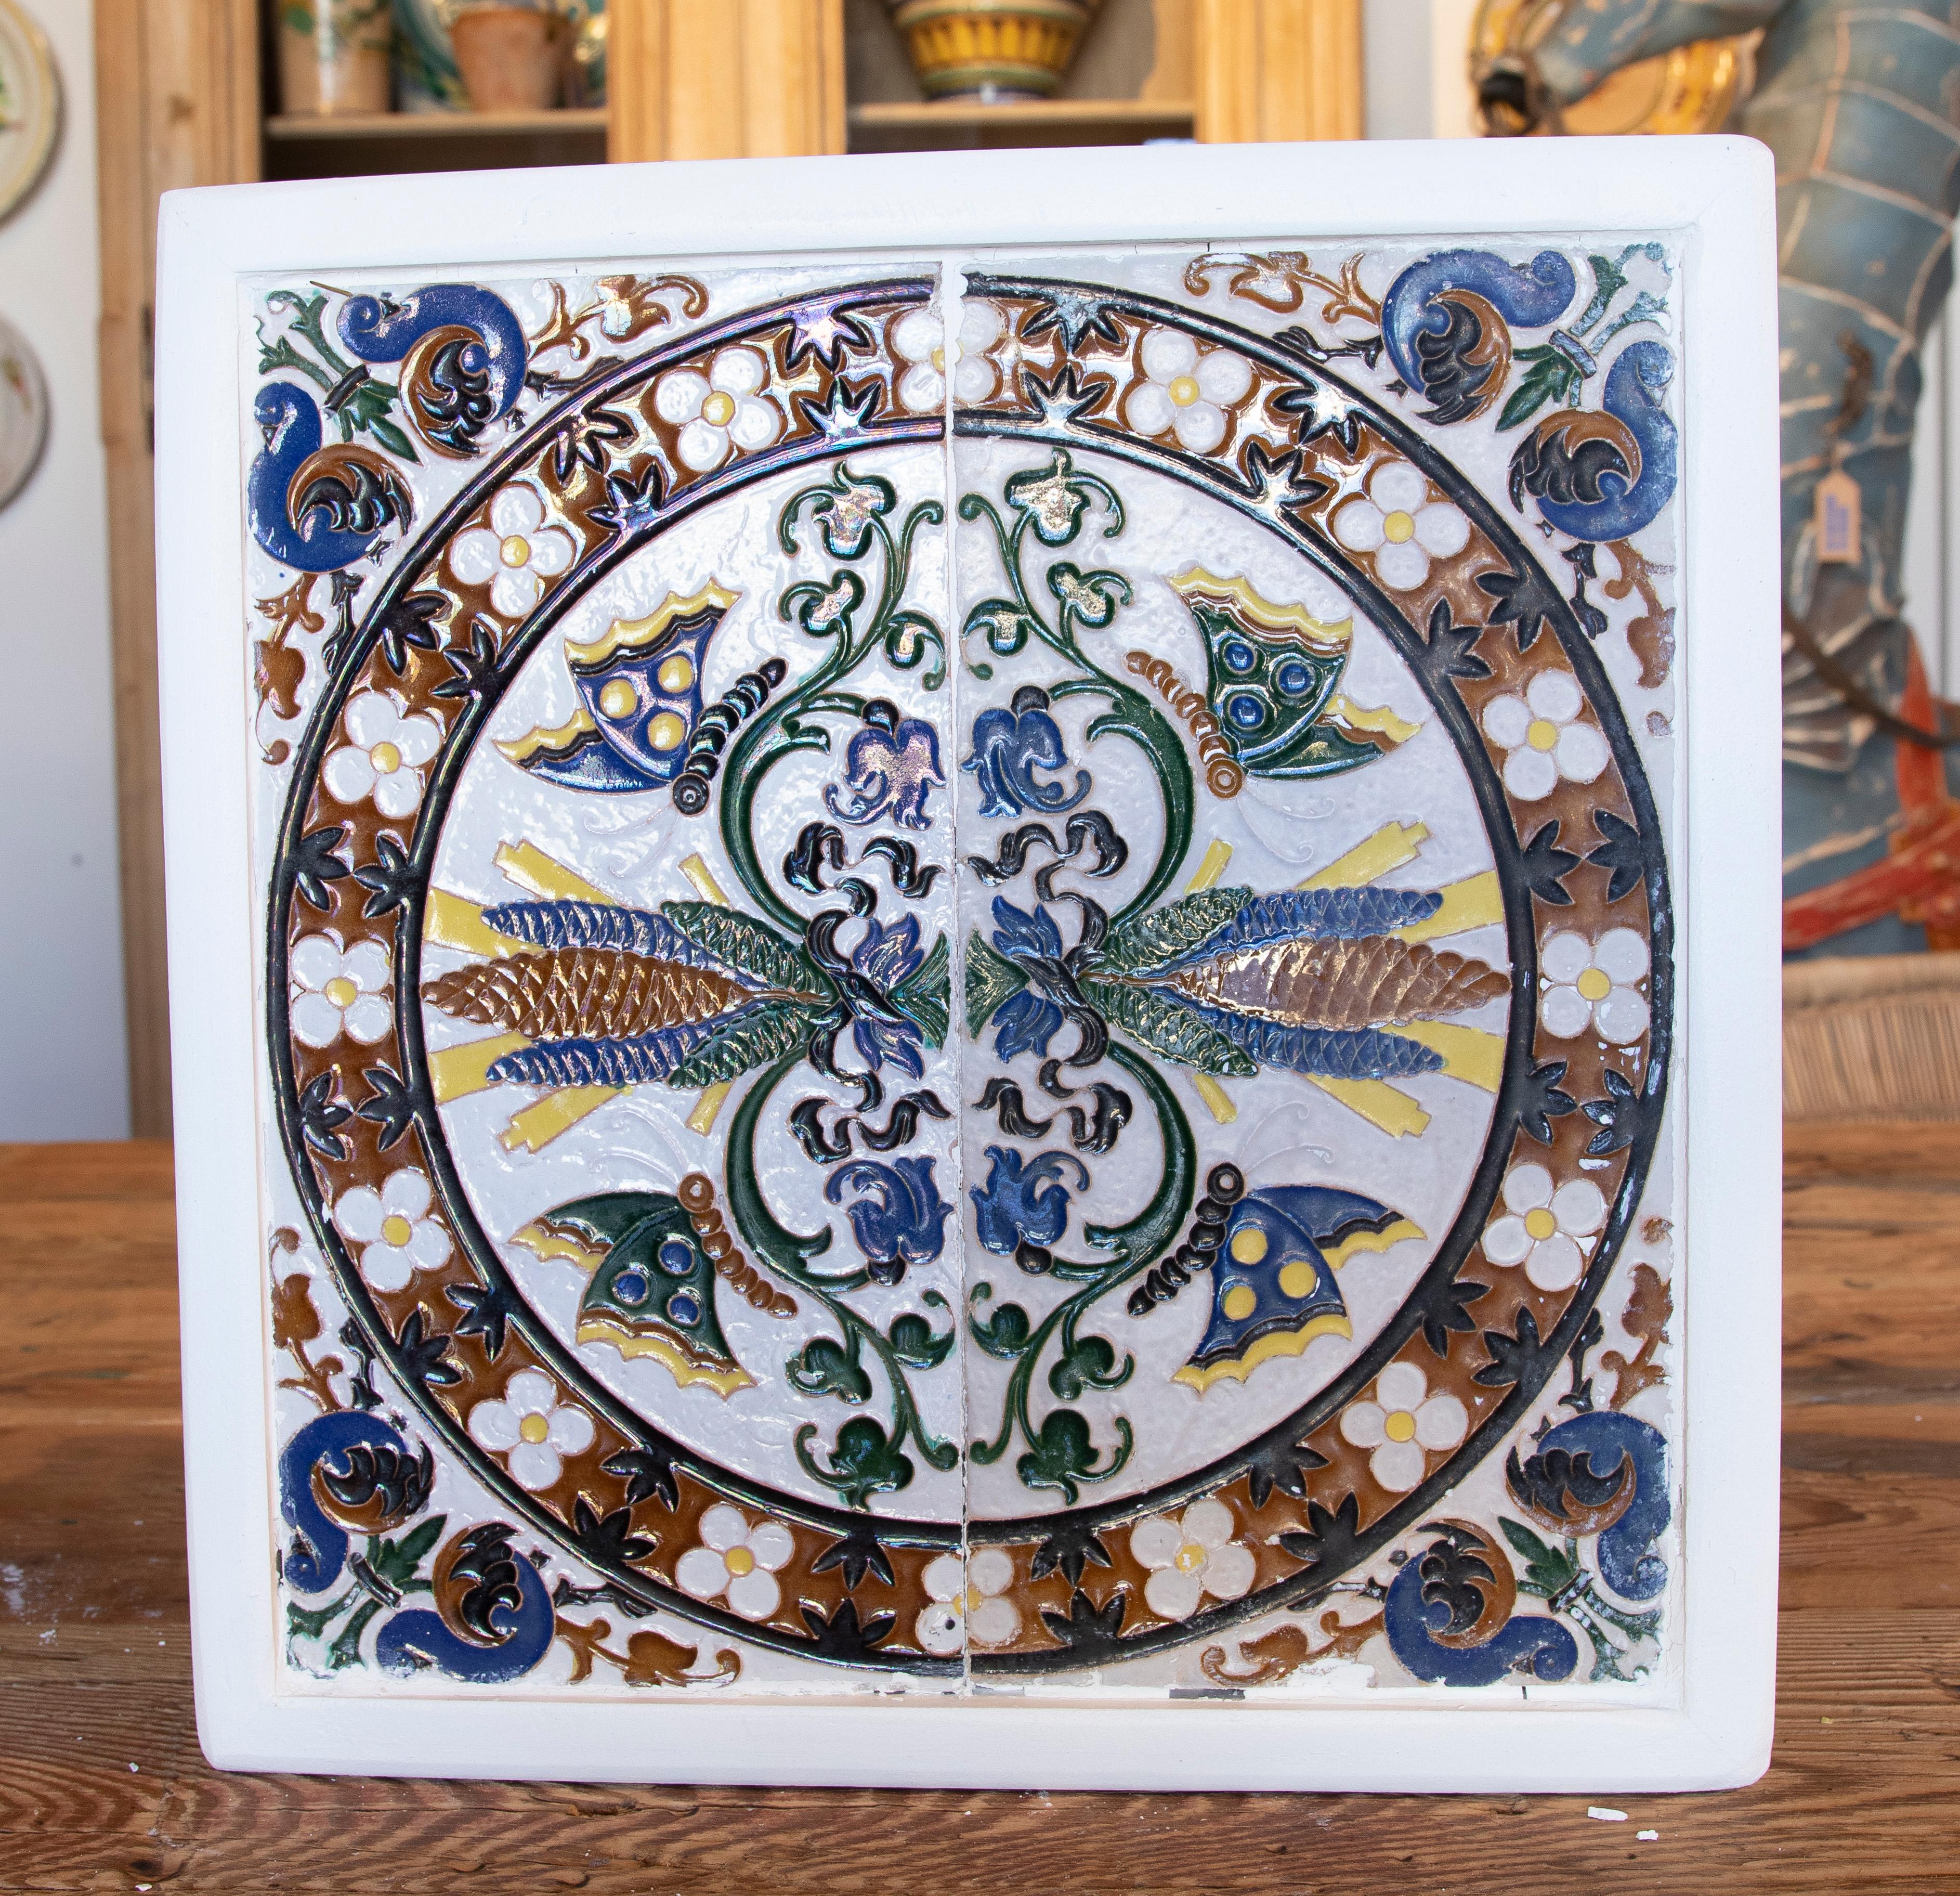 1950s Spanish decorative tile framed in wood in different colours.